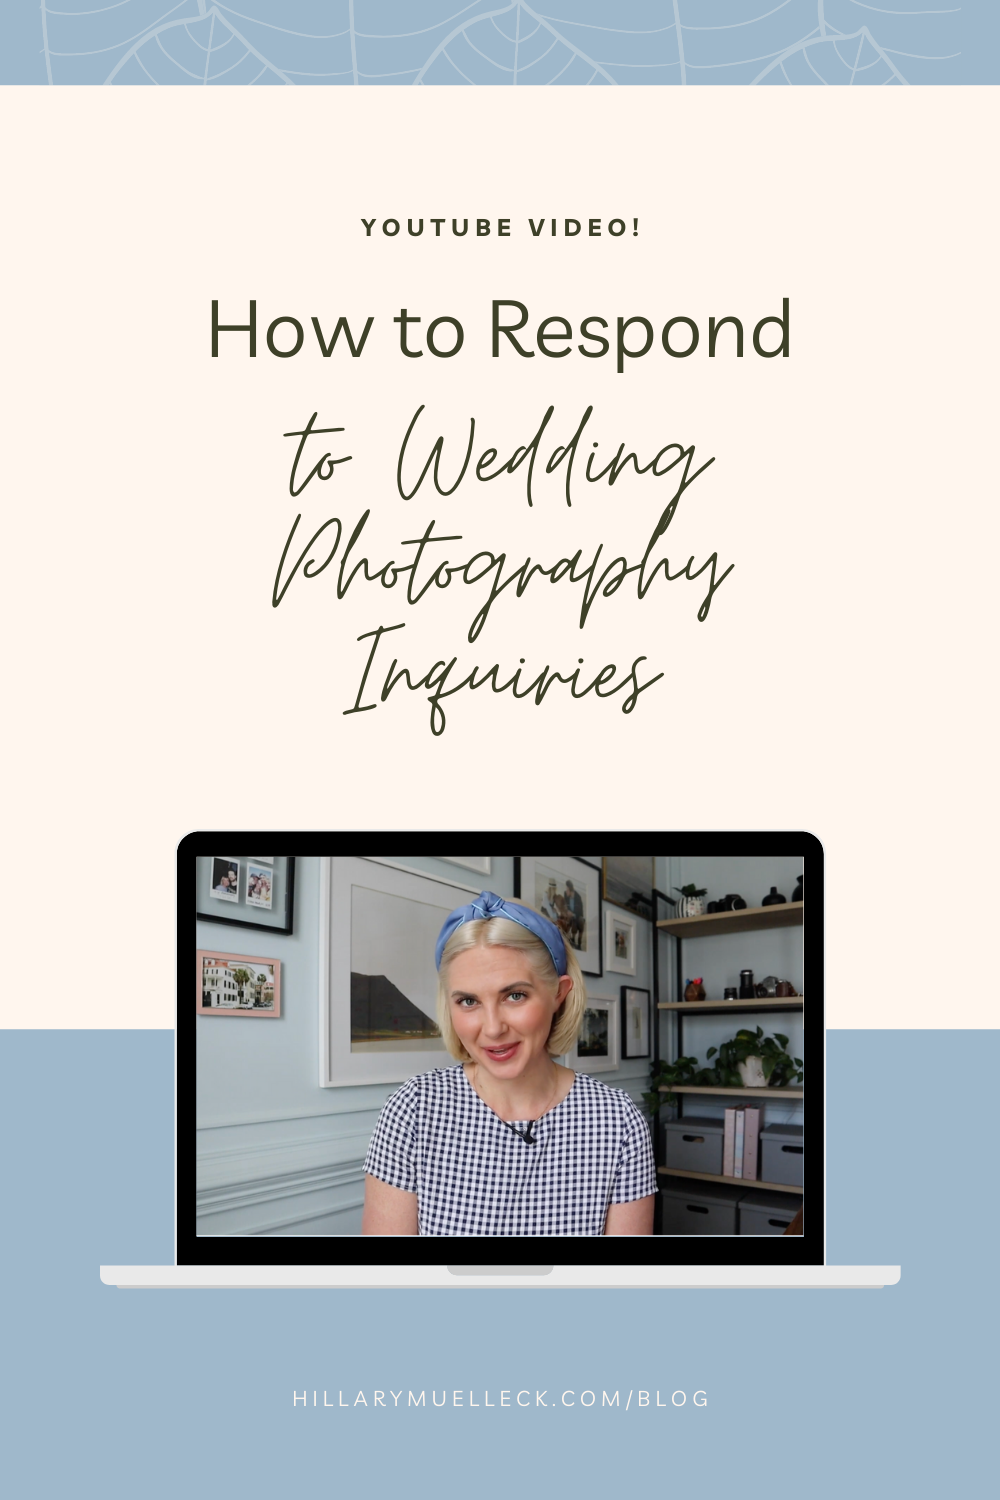 How to respond to wedding photography inquiries for more bookings: wedding photographer Hillary Muelleck shares her thoughts